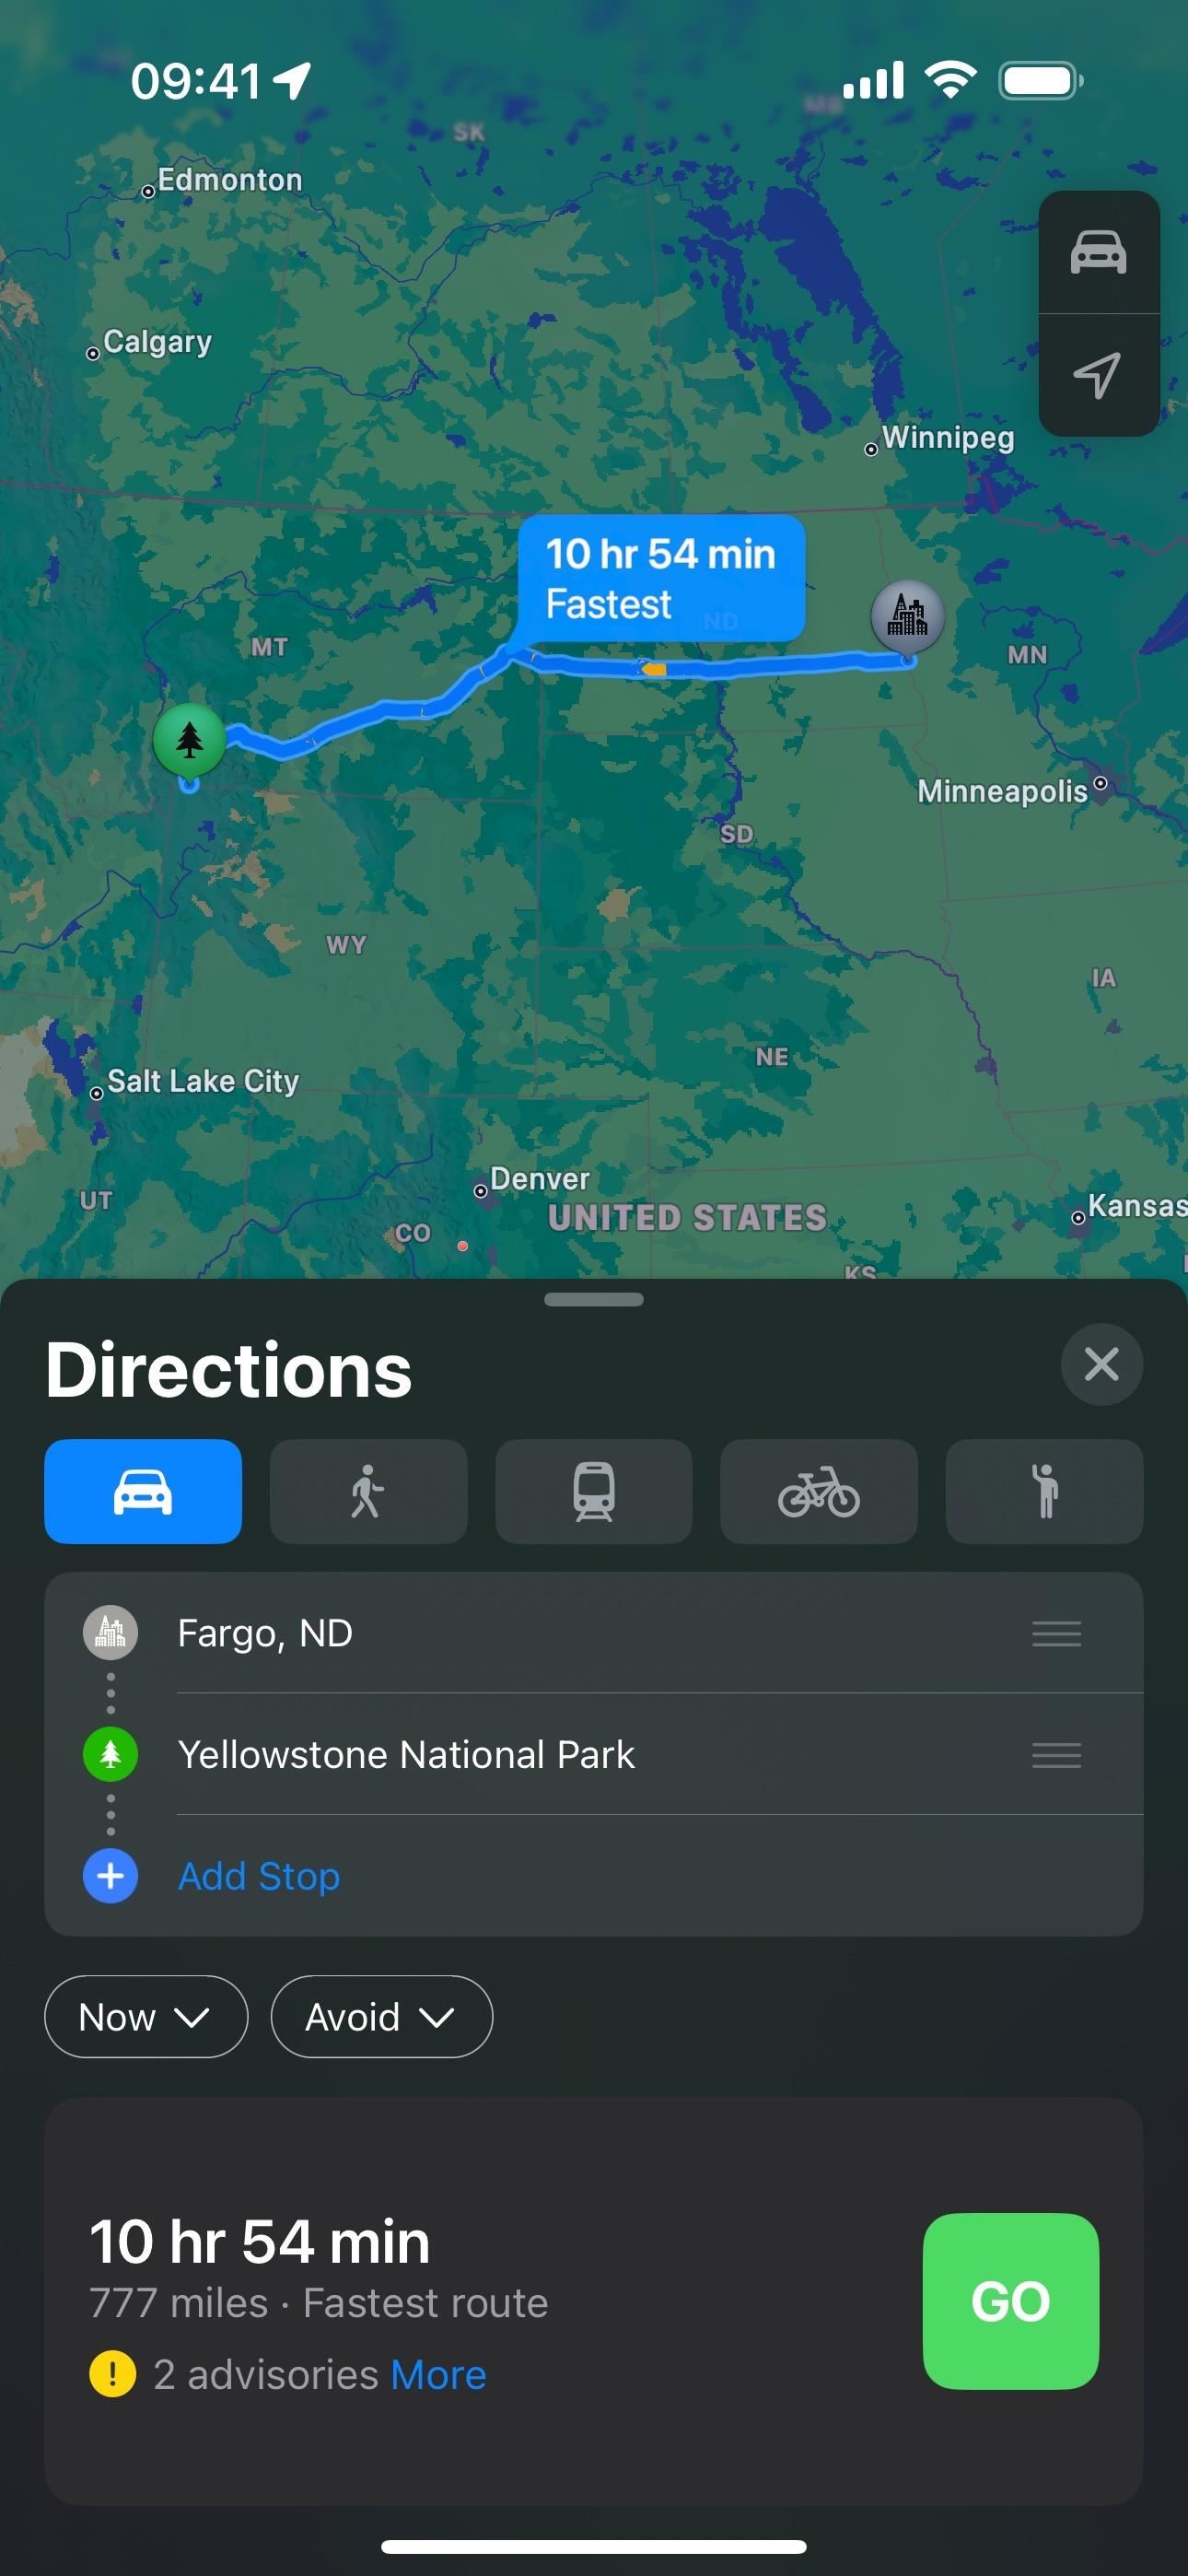 How to Download Offline Maps in Apple Maps — Everything You Need to Know